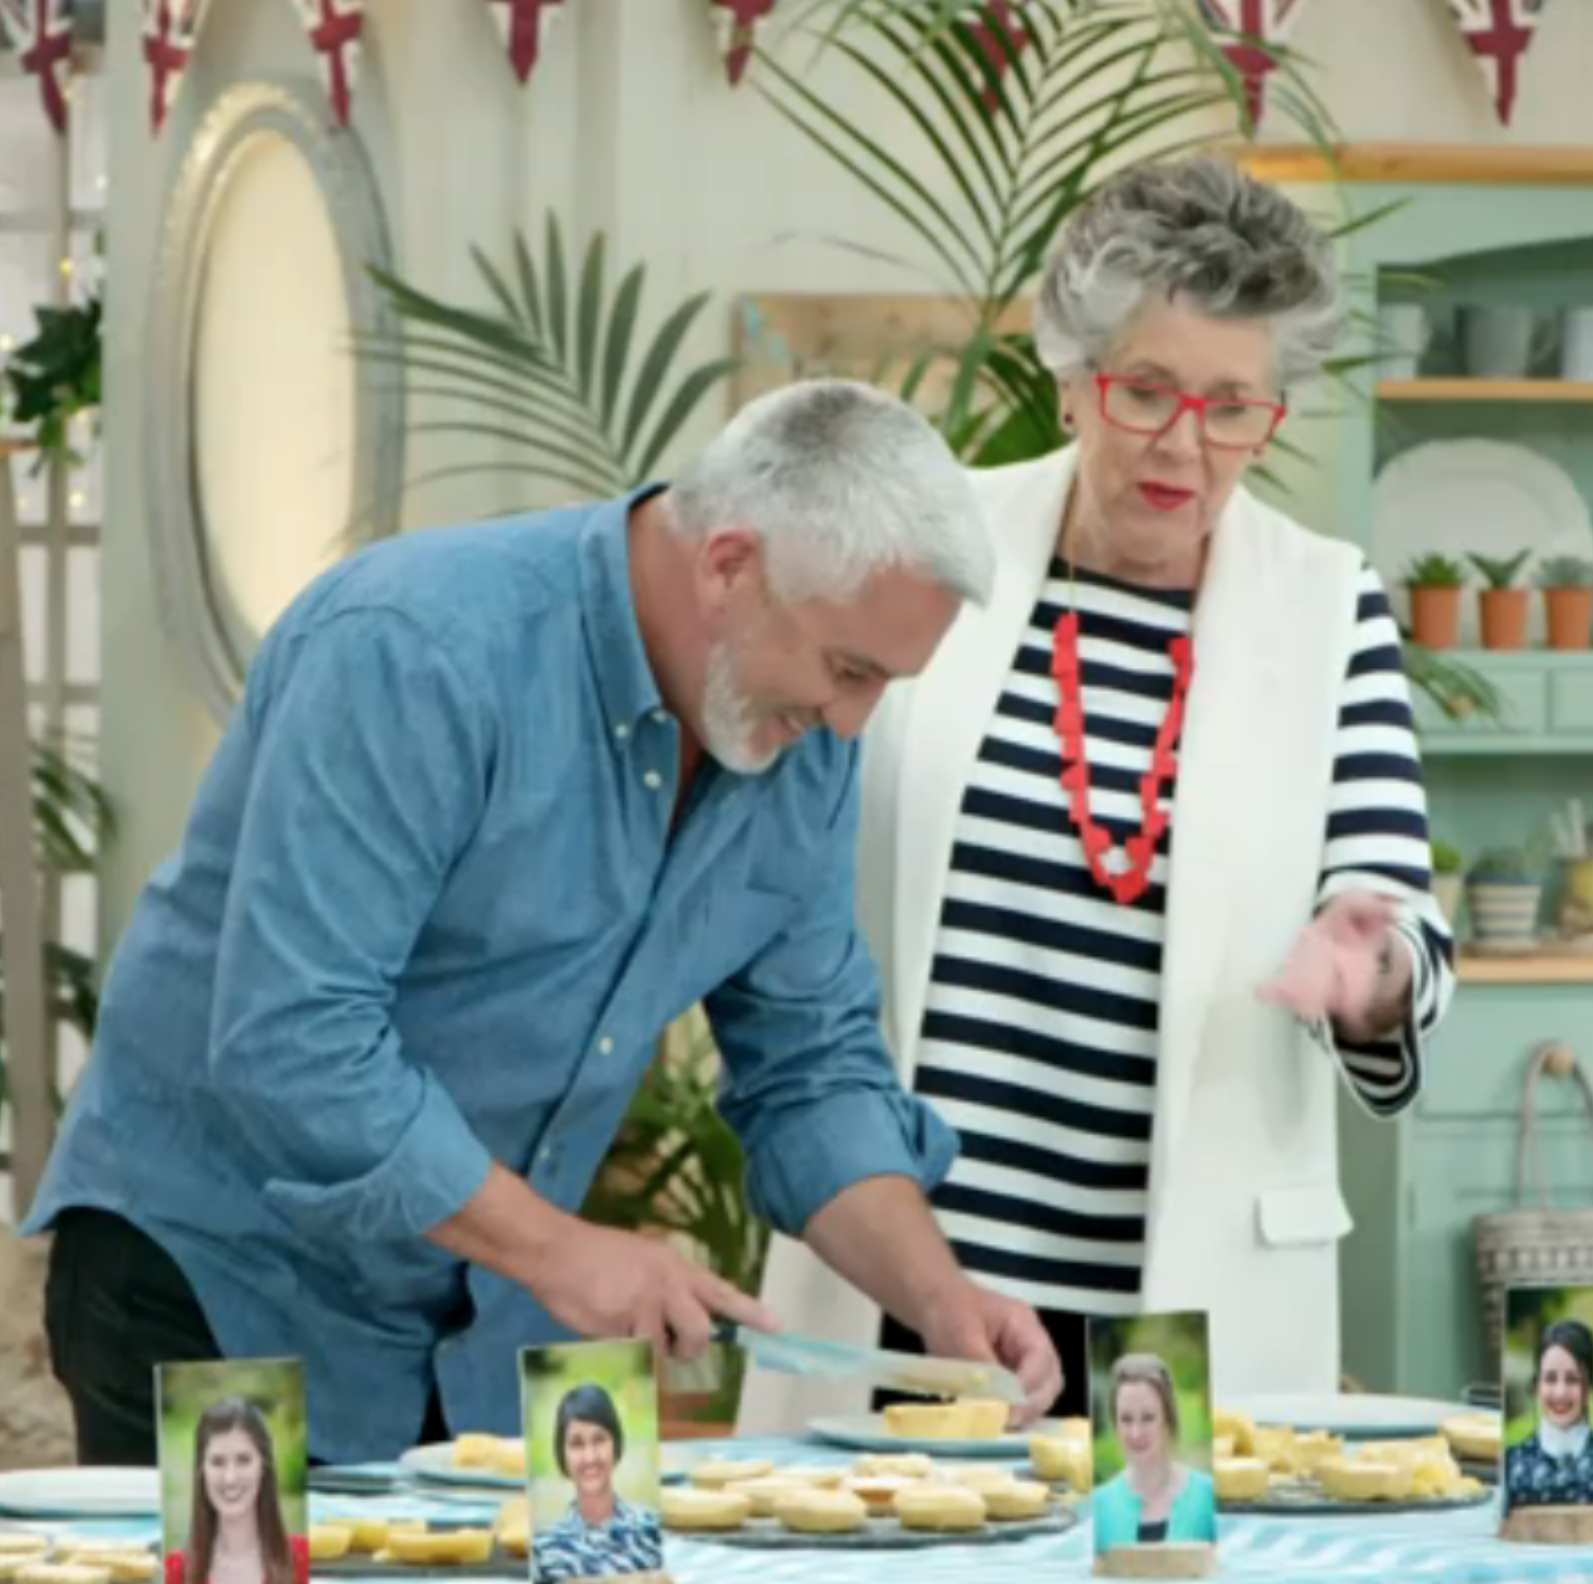 Bake Off 9/17/19: Paul Hollywood and Prue Leith